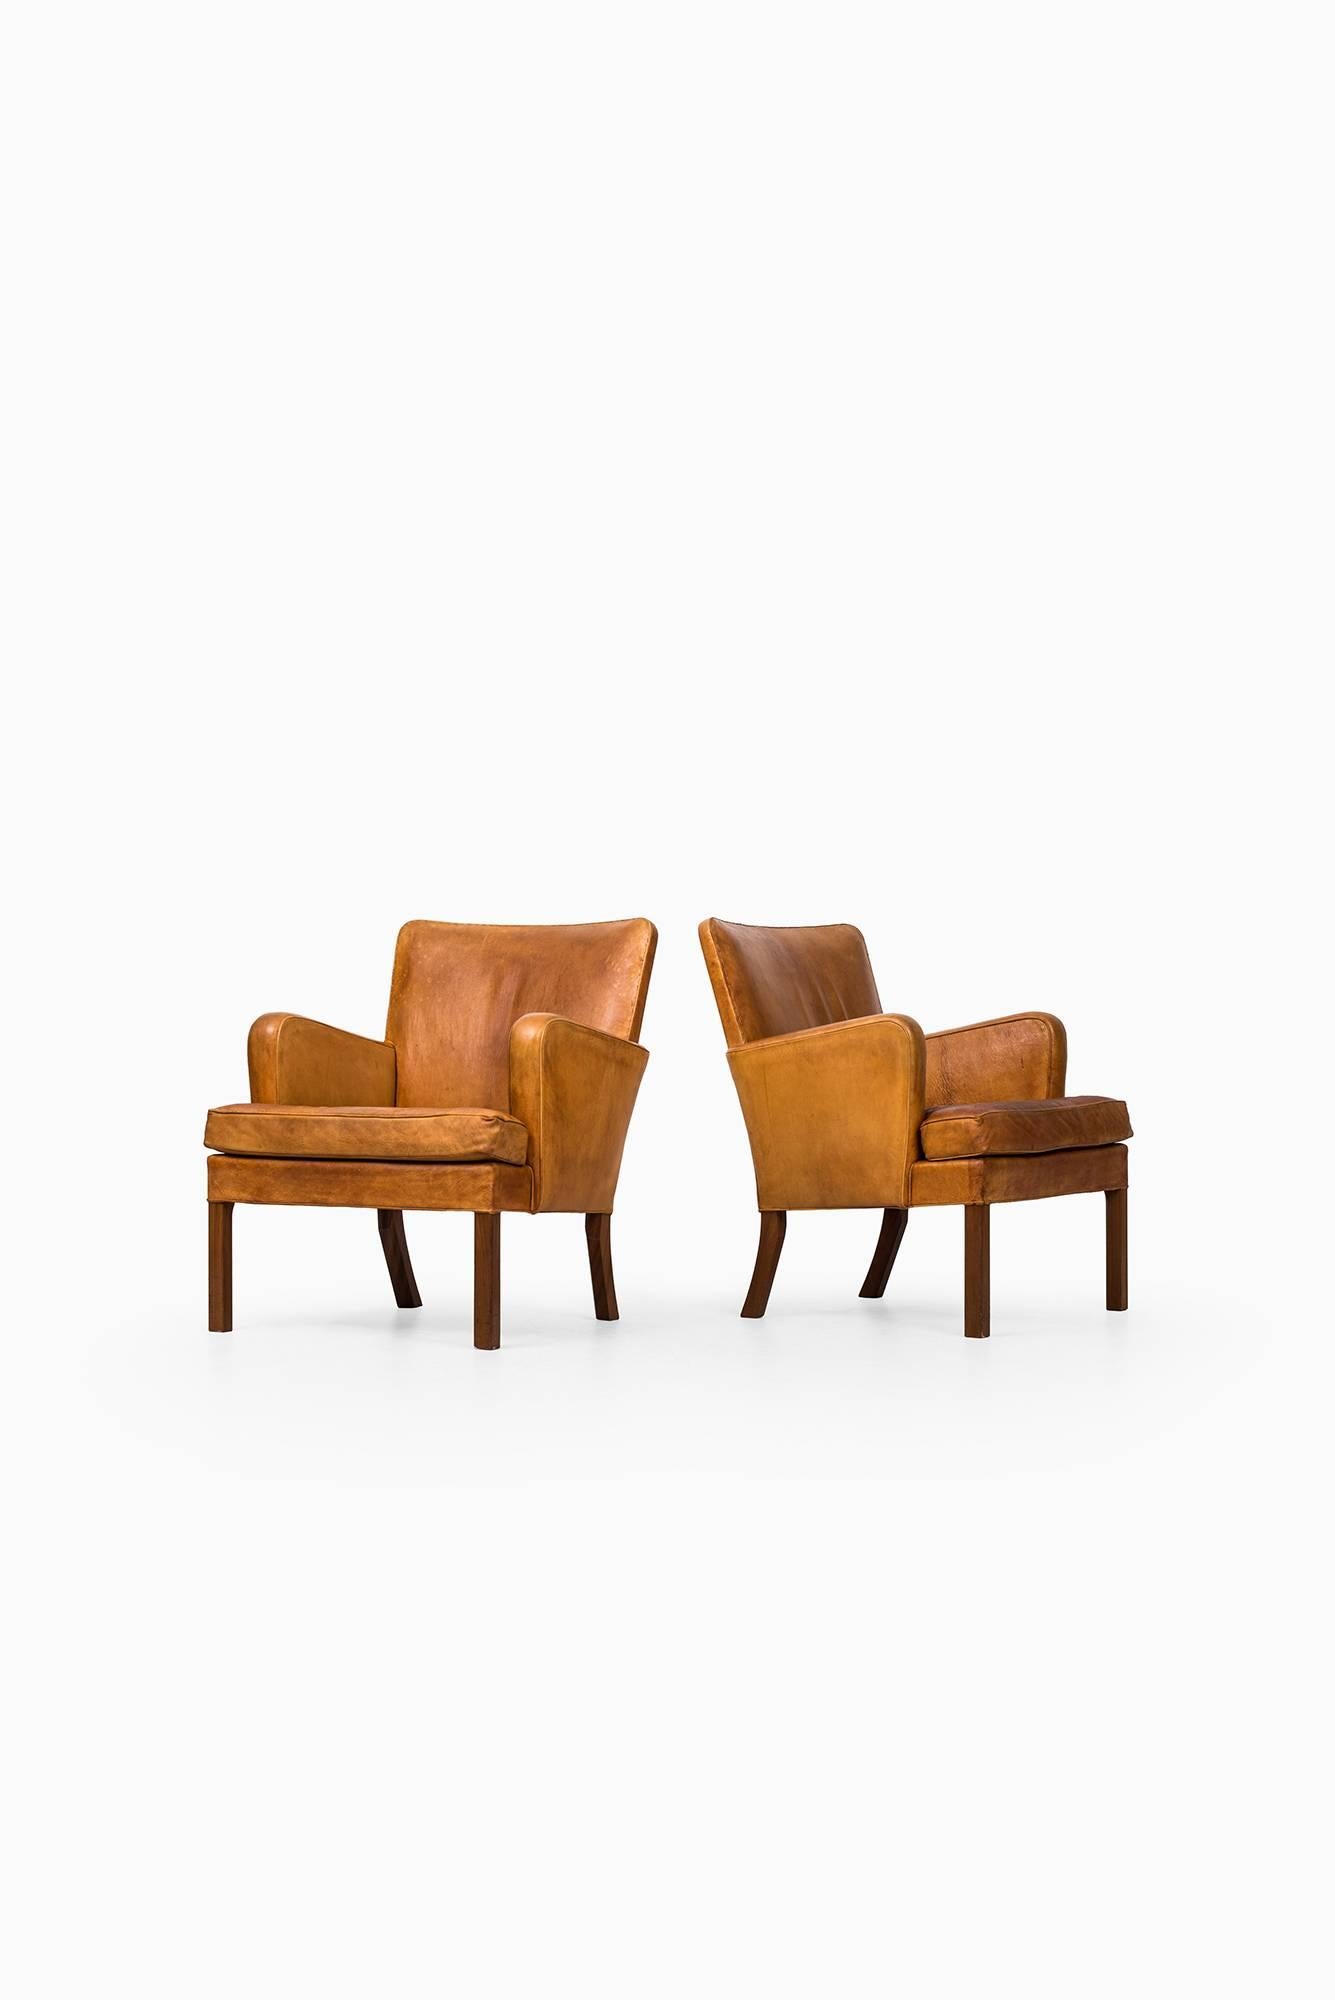 Rare pair of easy chairs model 5313 designed by Kaare Klint. Produced by Rud. Rasmussen Cabinetmakers in Denmark.